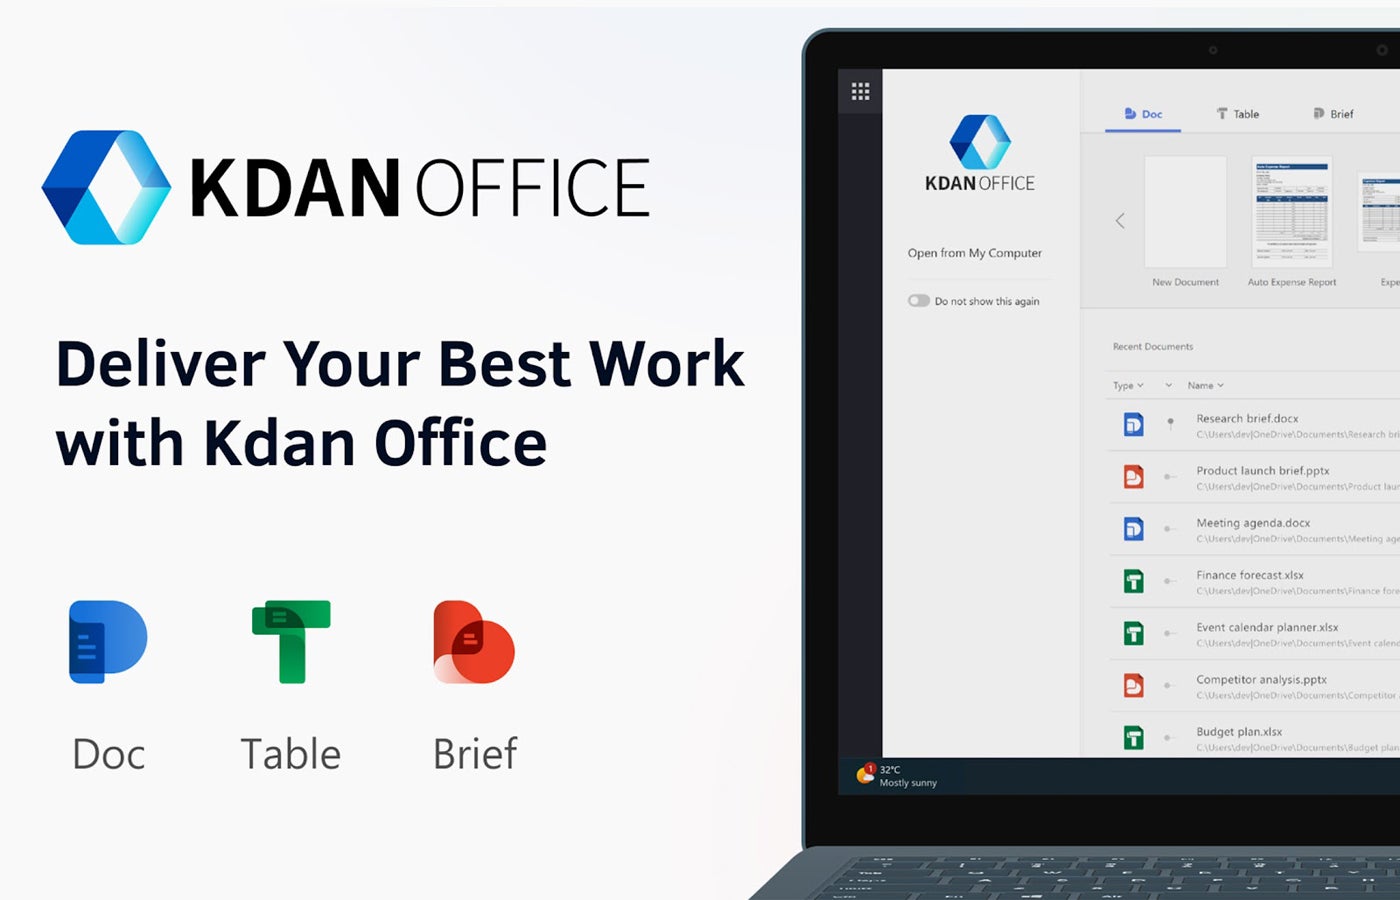 Get This Full-Featured Alternative to MS Office for Only $50